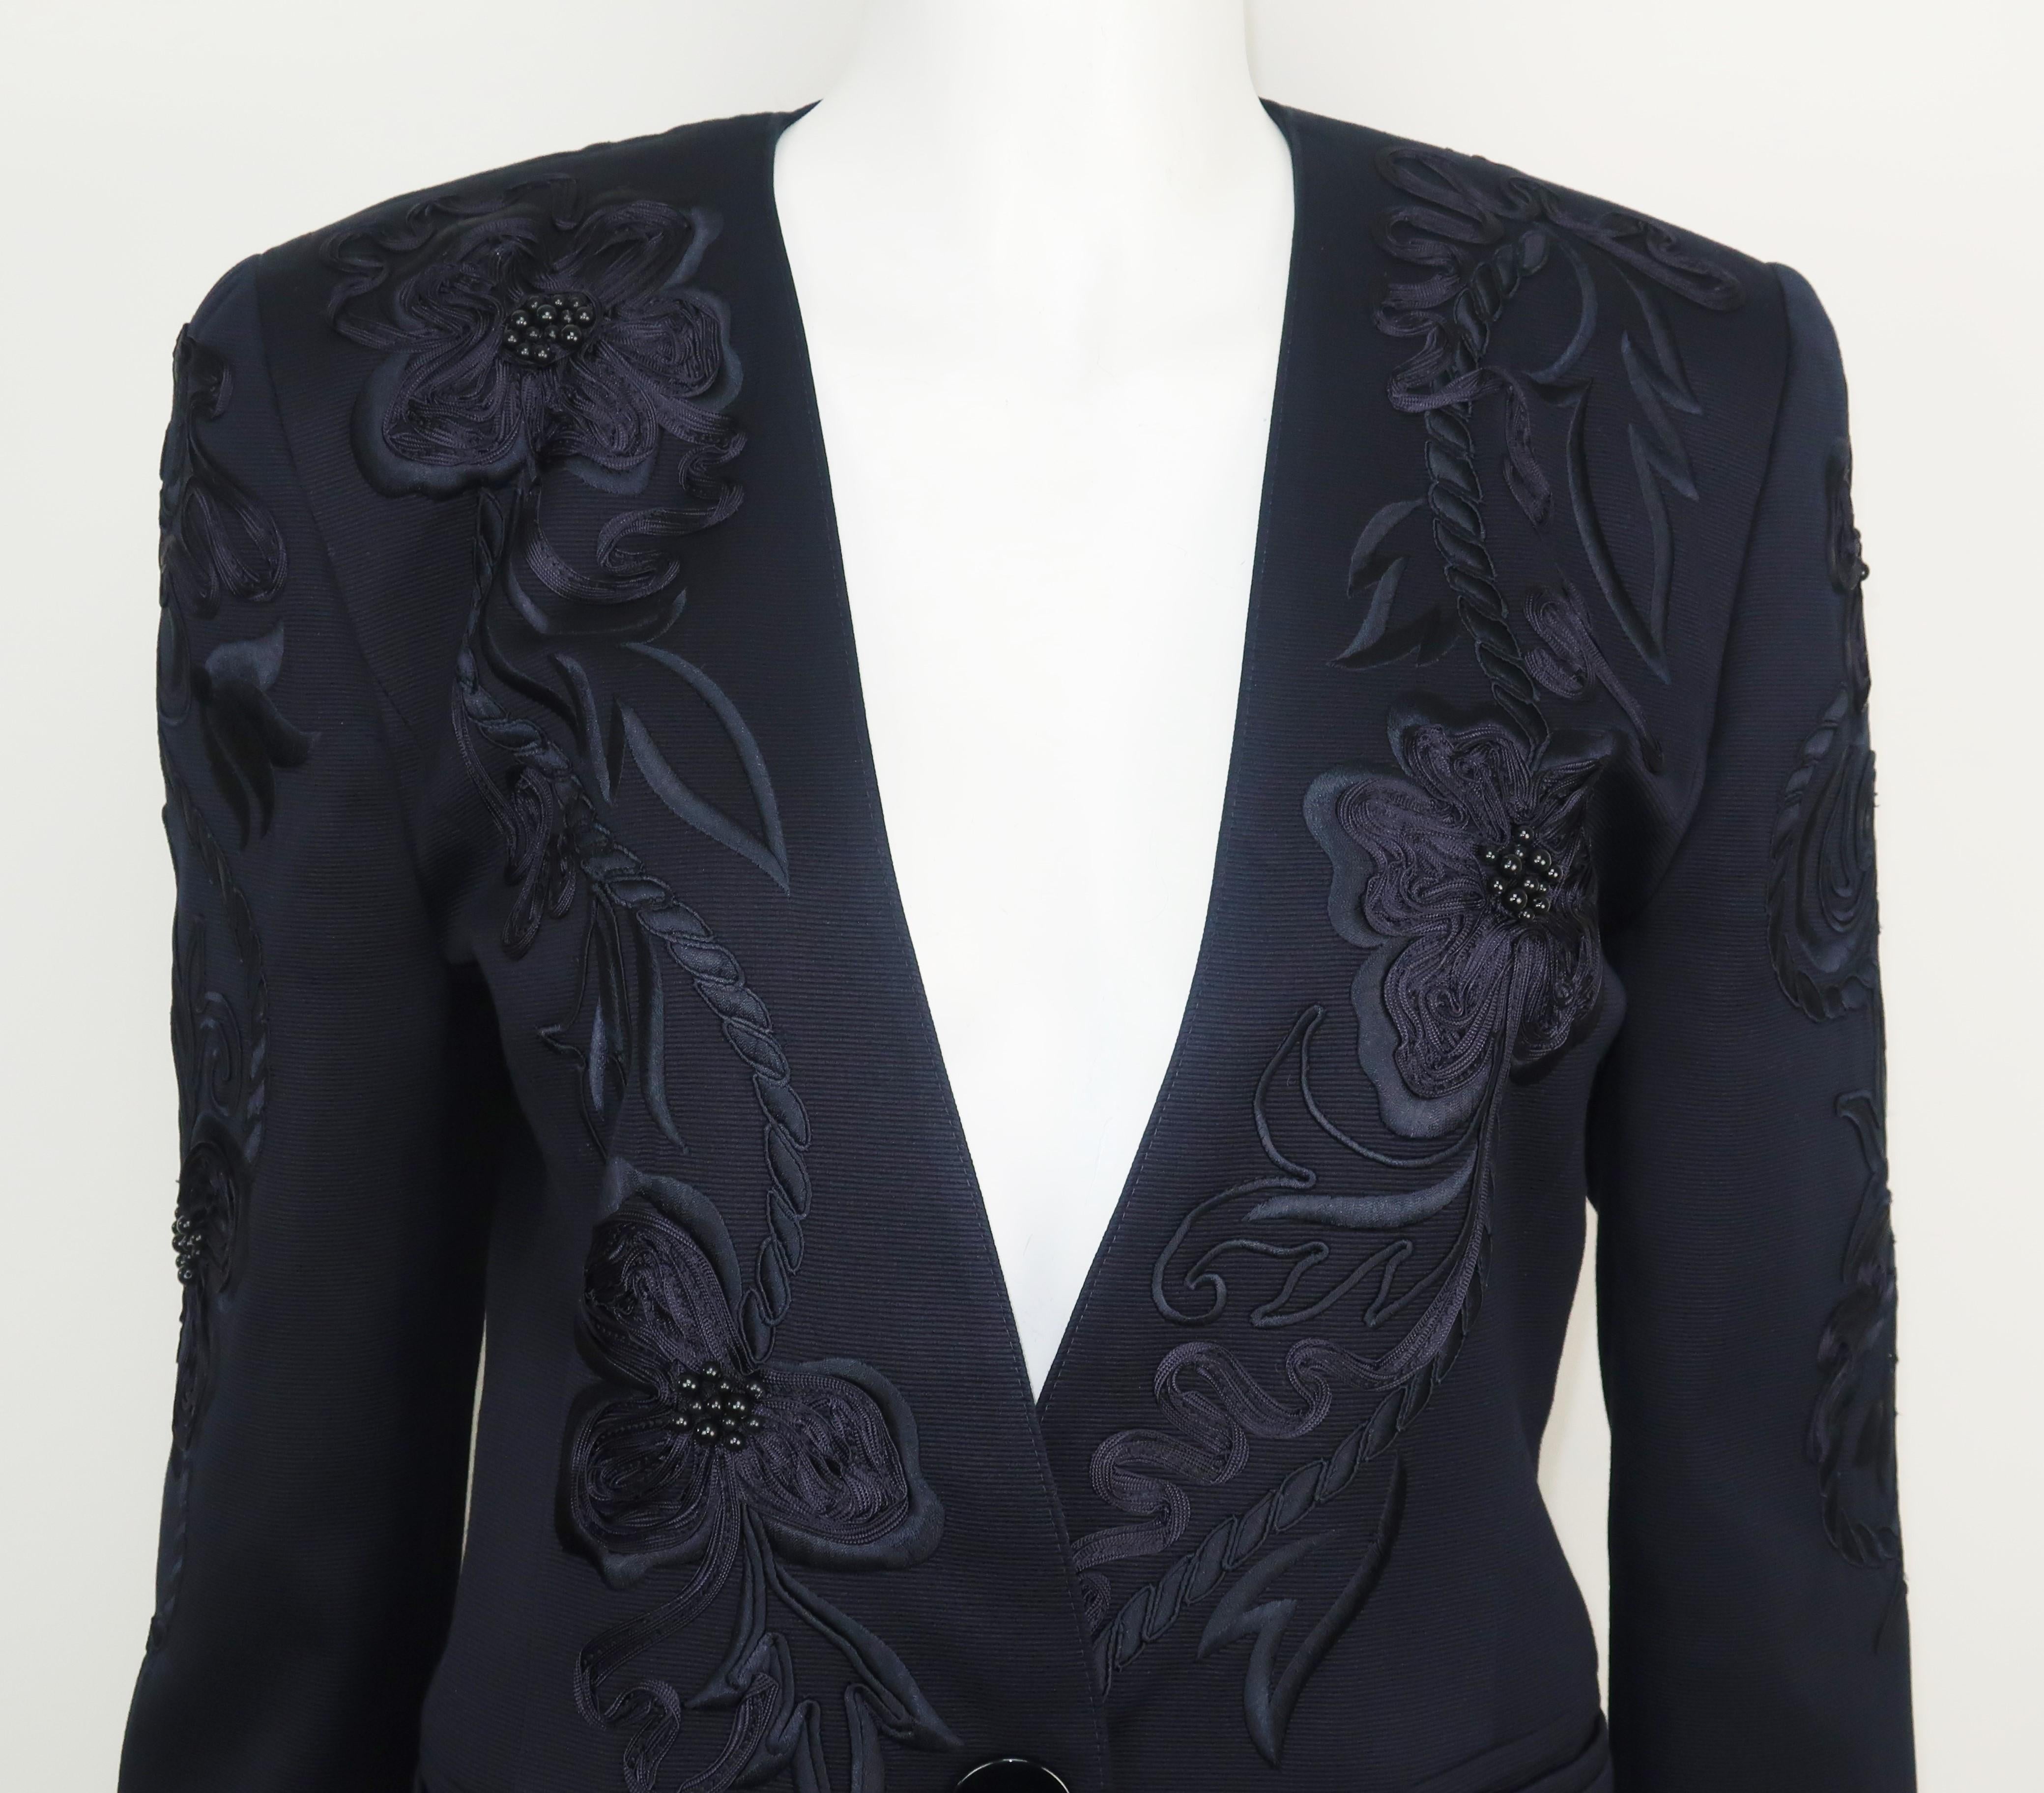 This beautiful midnight blue cotton faille jacket by Margaretha Ley for her Escada label offers a polished look for warm weather evenings.  The collarless jacket buttons at the front with pockets and has a 1940's style menswear look created by